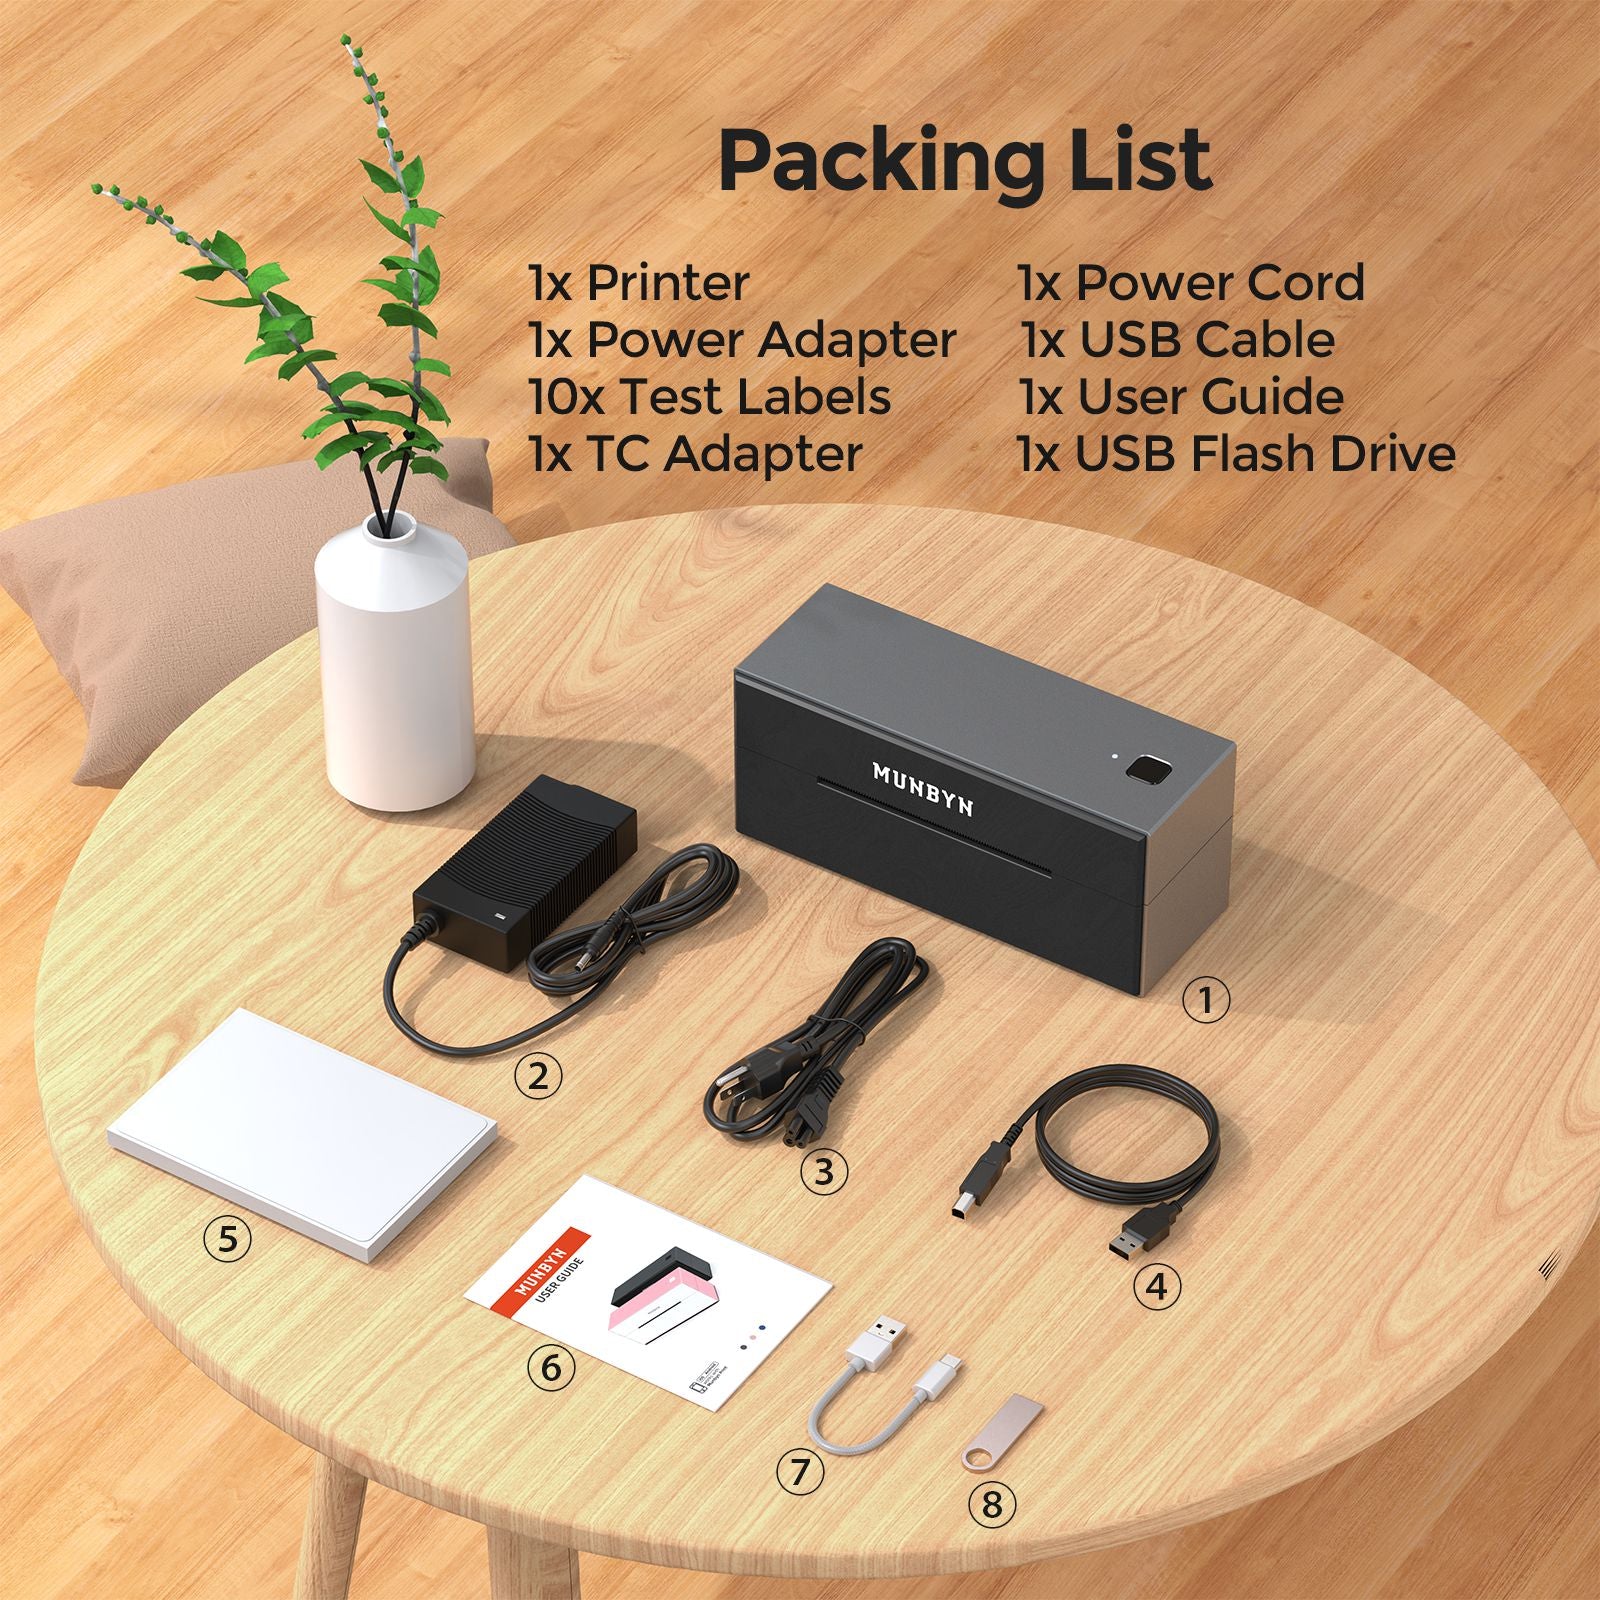 The packing list of Munbyn Bluetooth thermal sticker label printer.